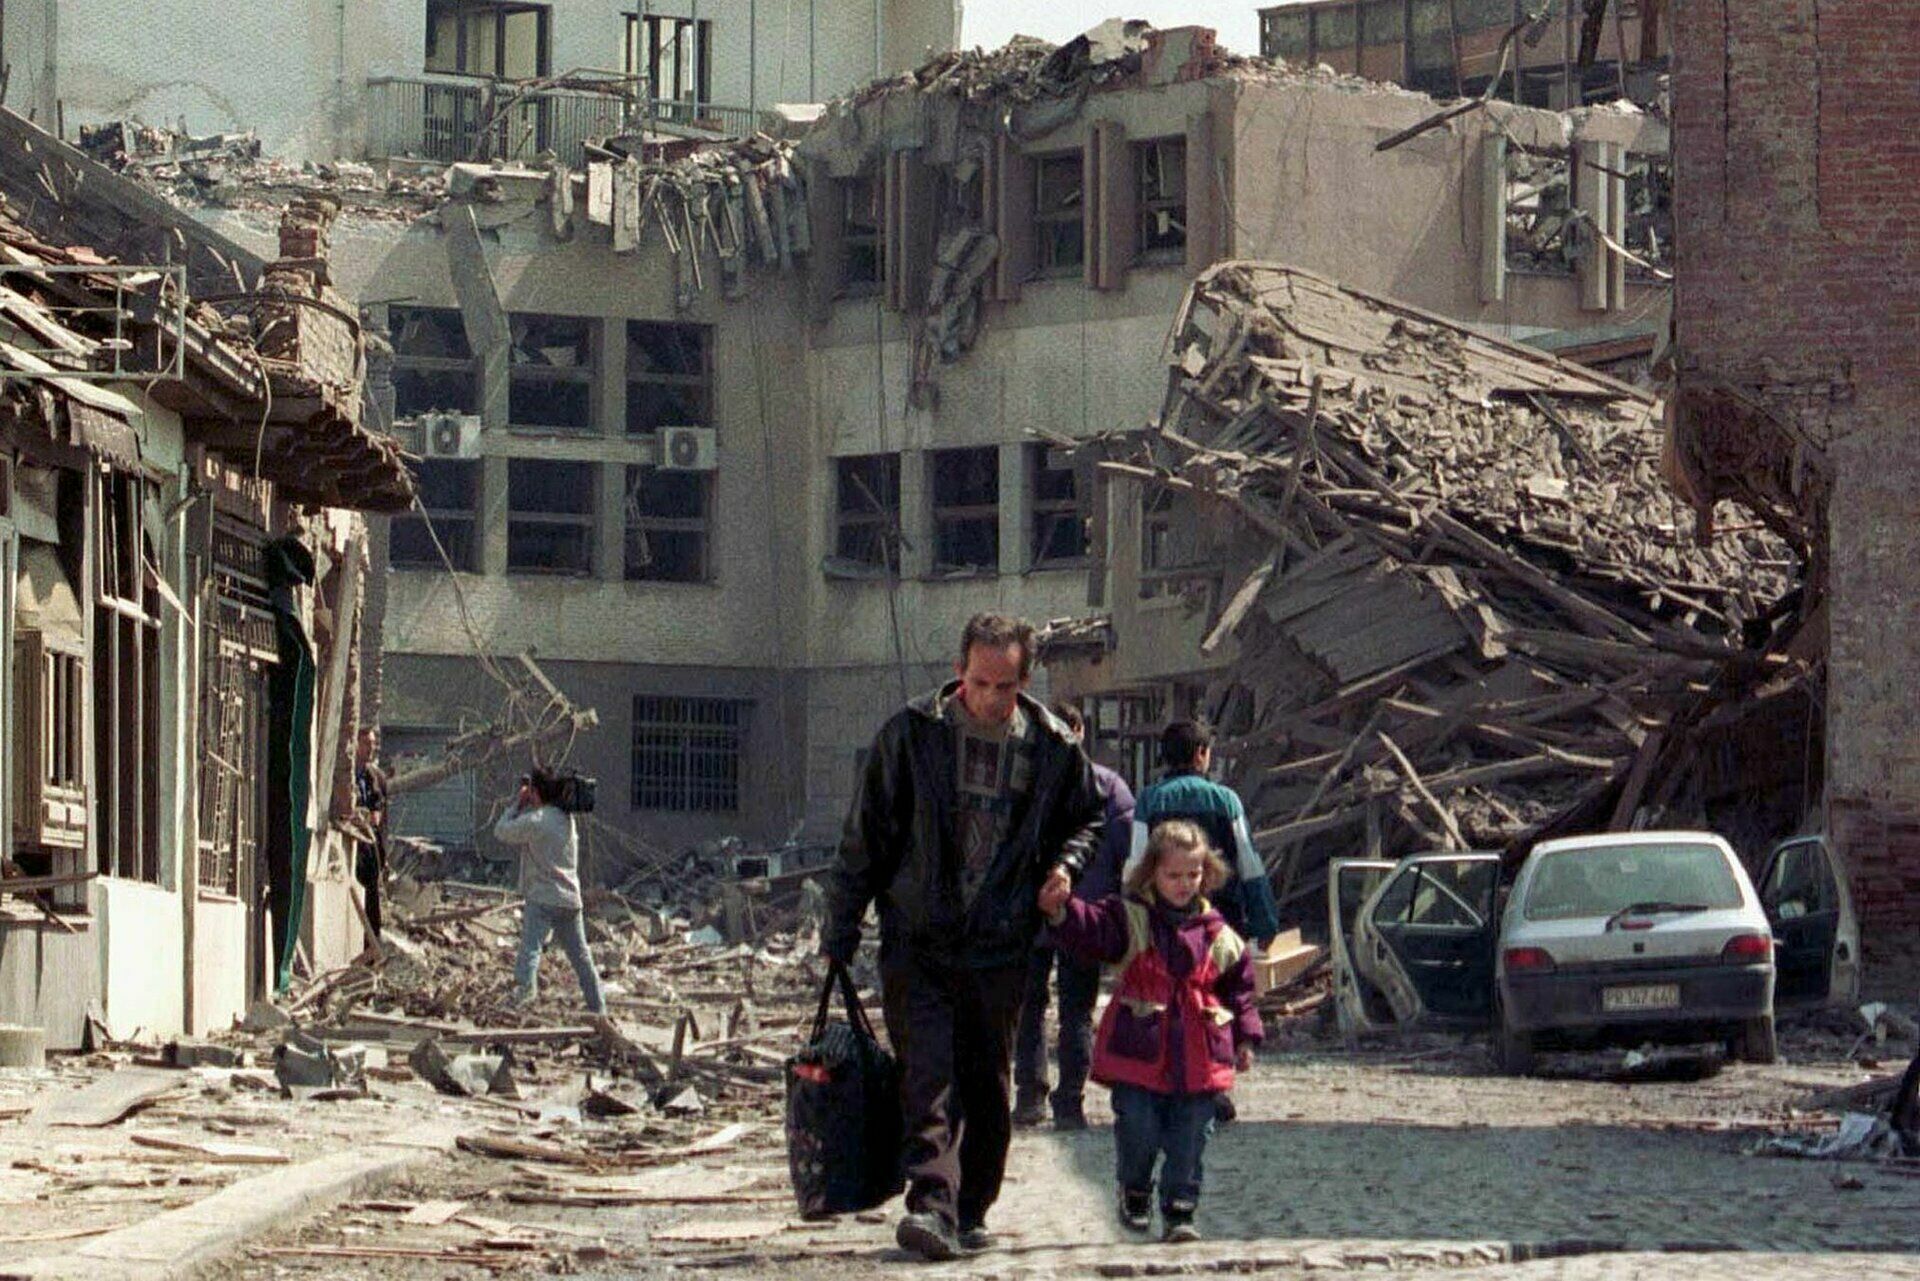 Death for the good? What were the consequences of the NATO bombing of Yugoslavia in 1999